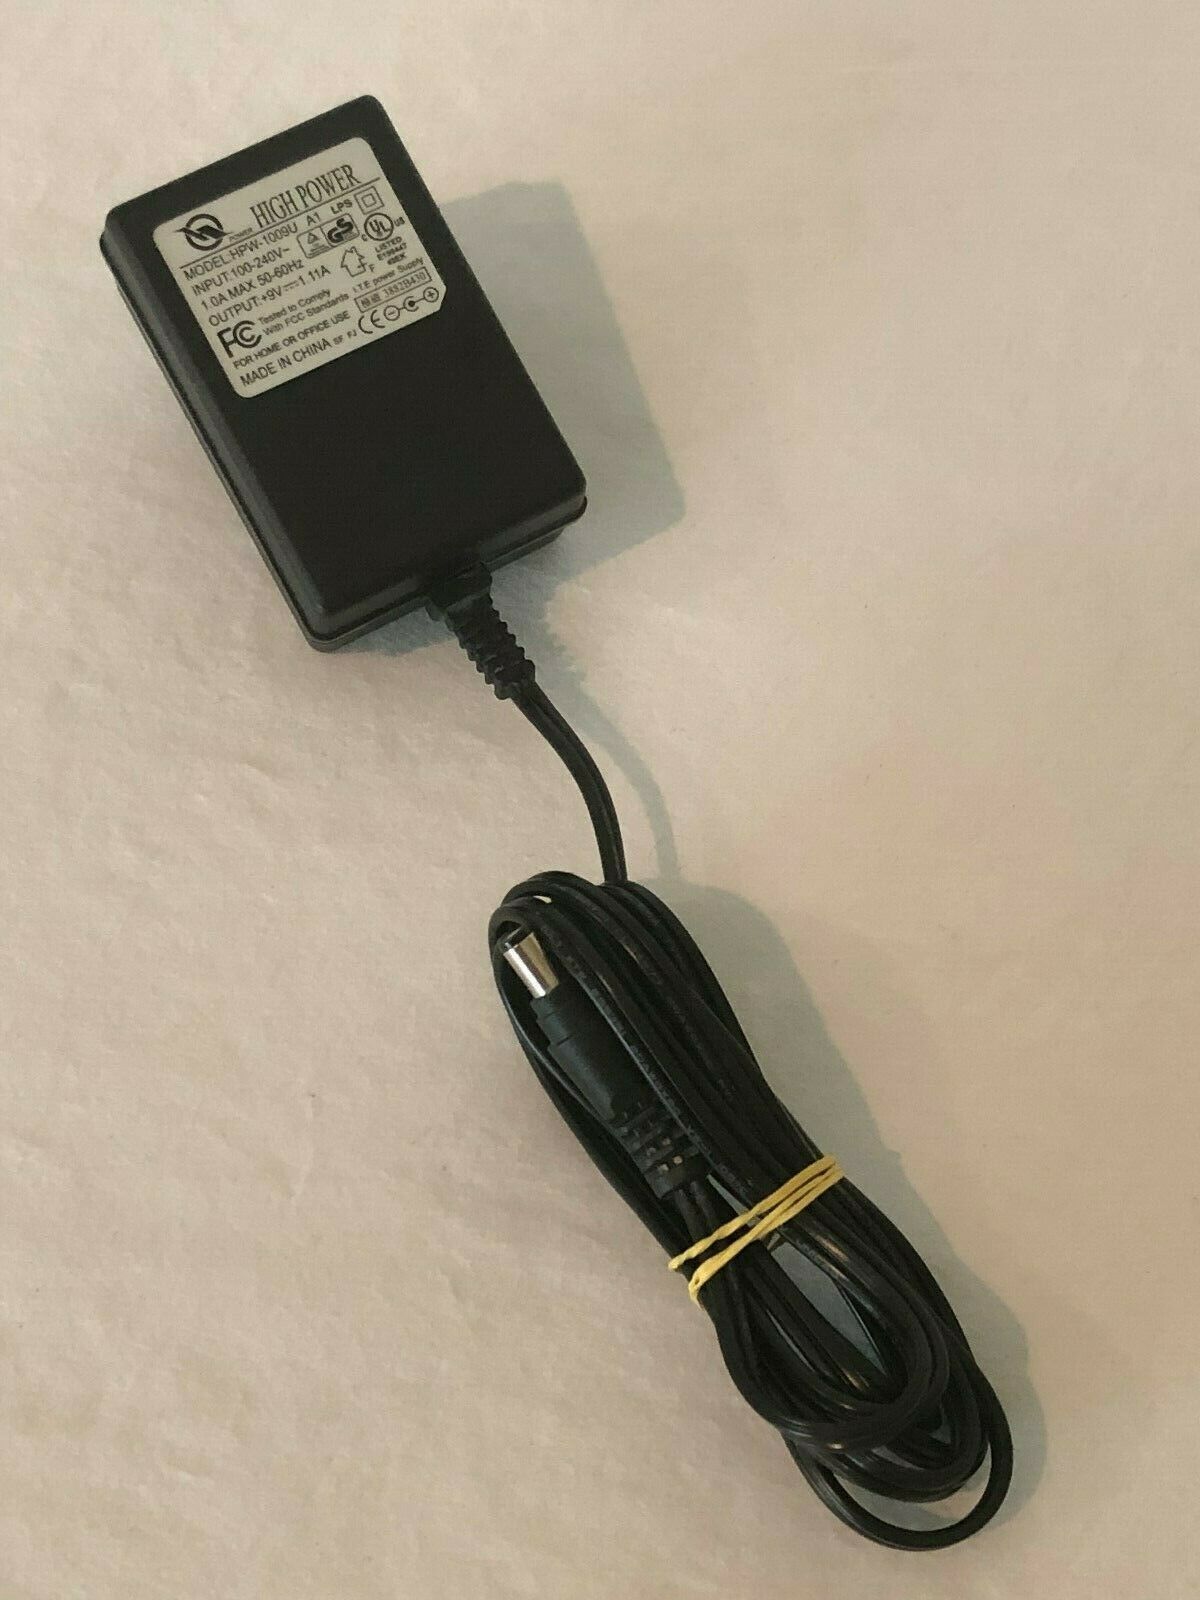 AC DC Power Supply Plug Charger Adapter High Power Model HPW-1009U 9V 1.11A Type: Charger Adapter Features: new Col - Click Image to Close